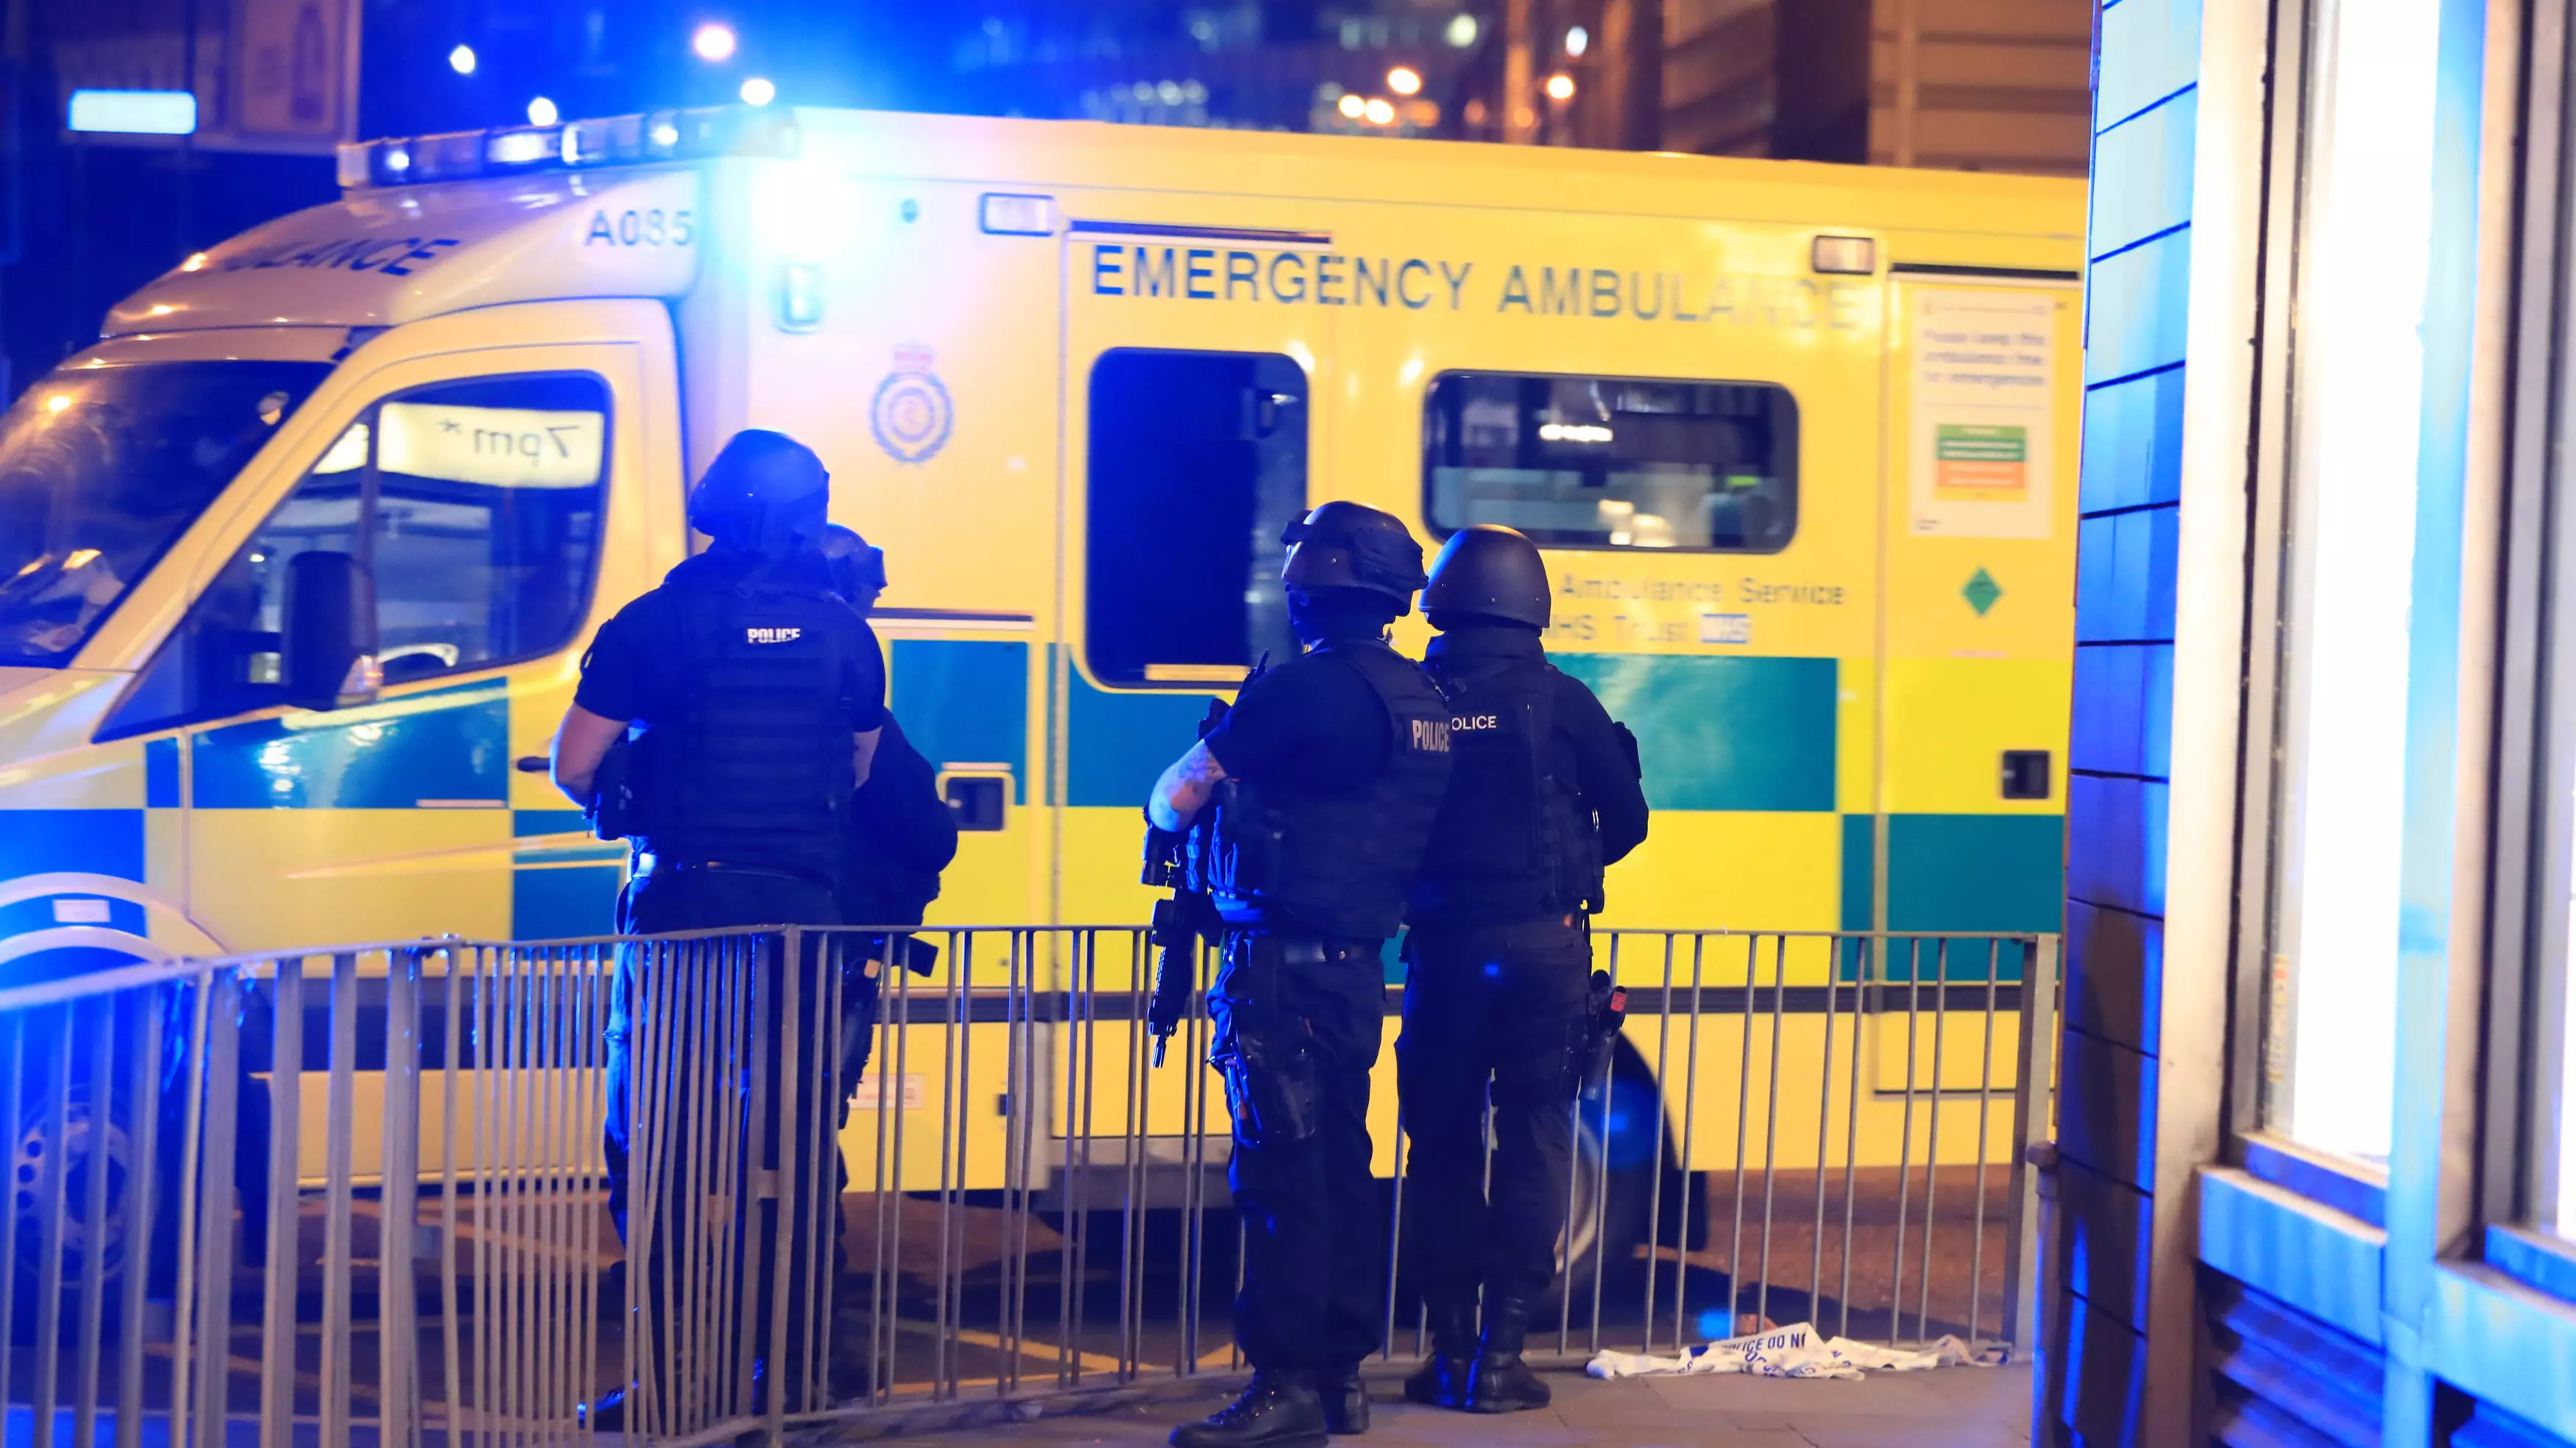 Homeless Man Held Dying Woman In His Arms After Manchester Terror Attack